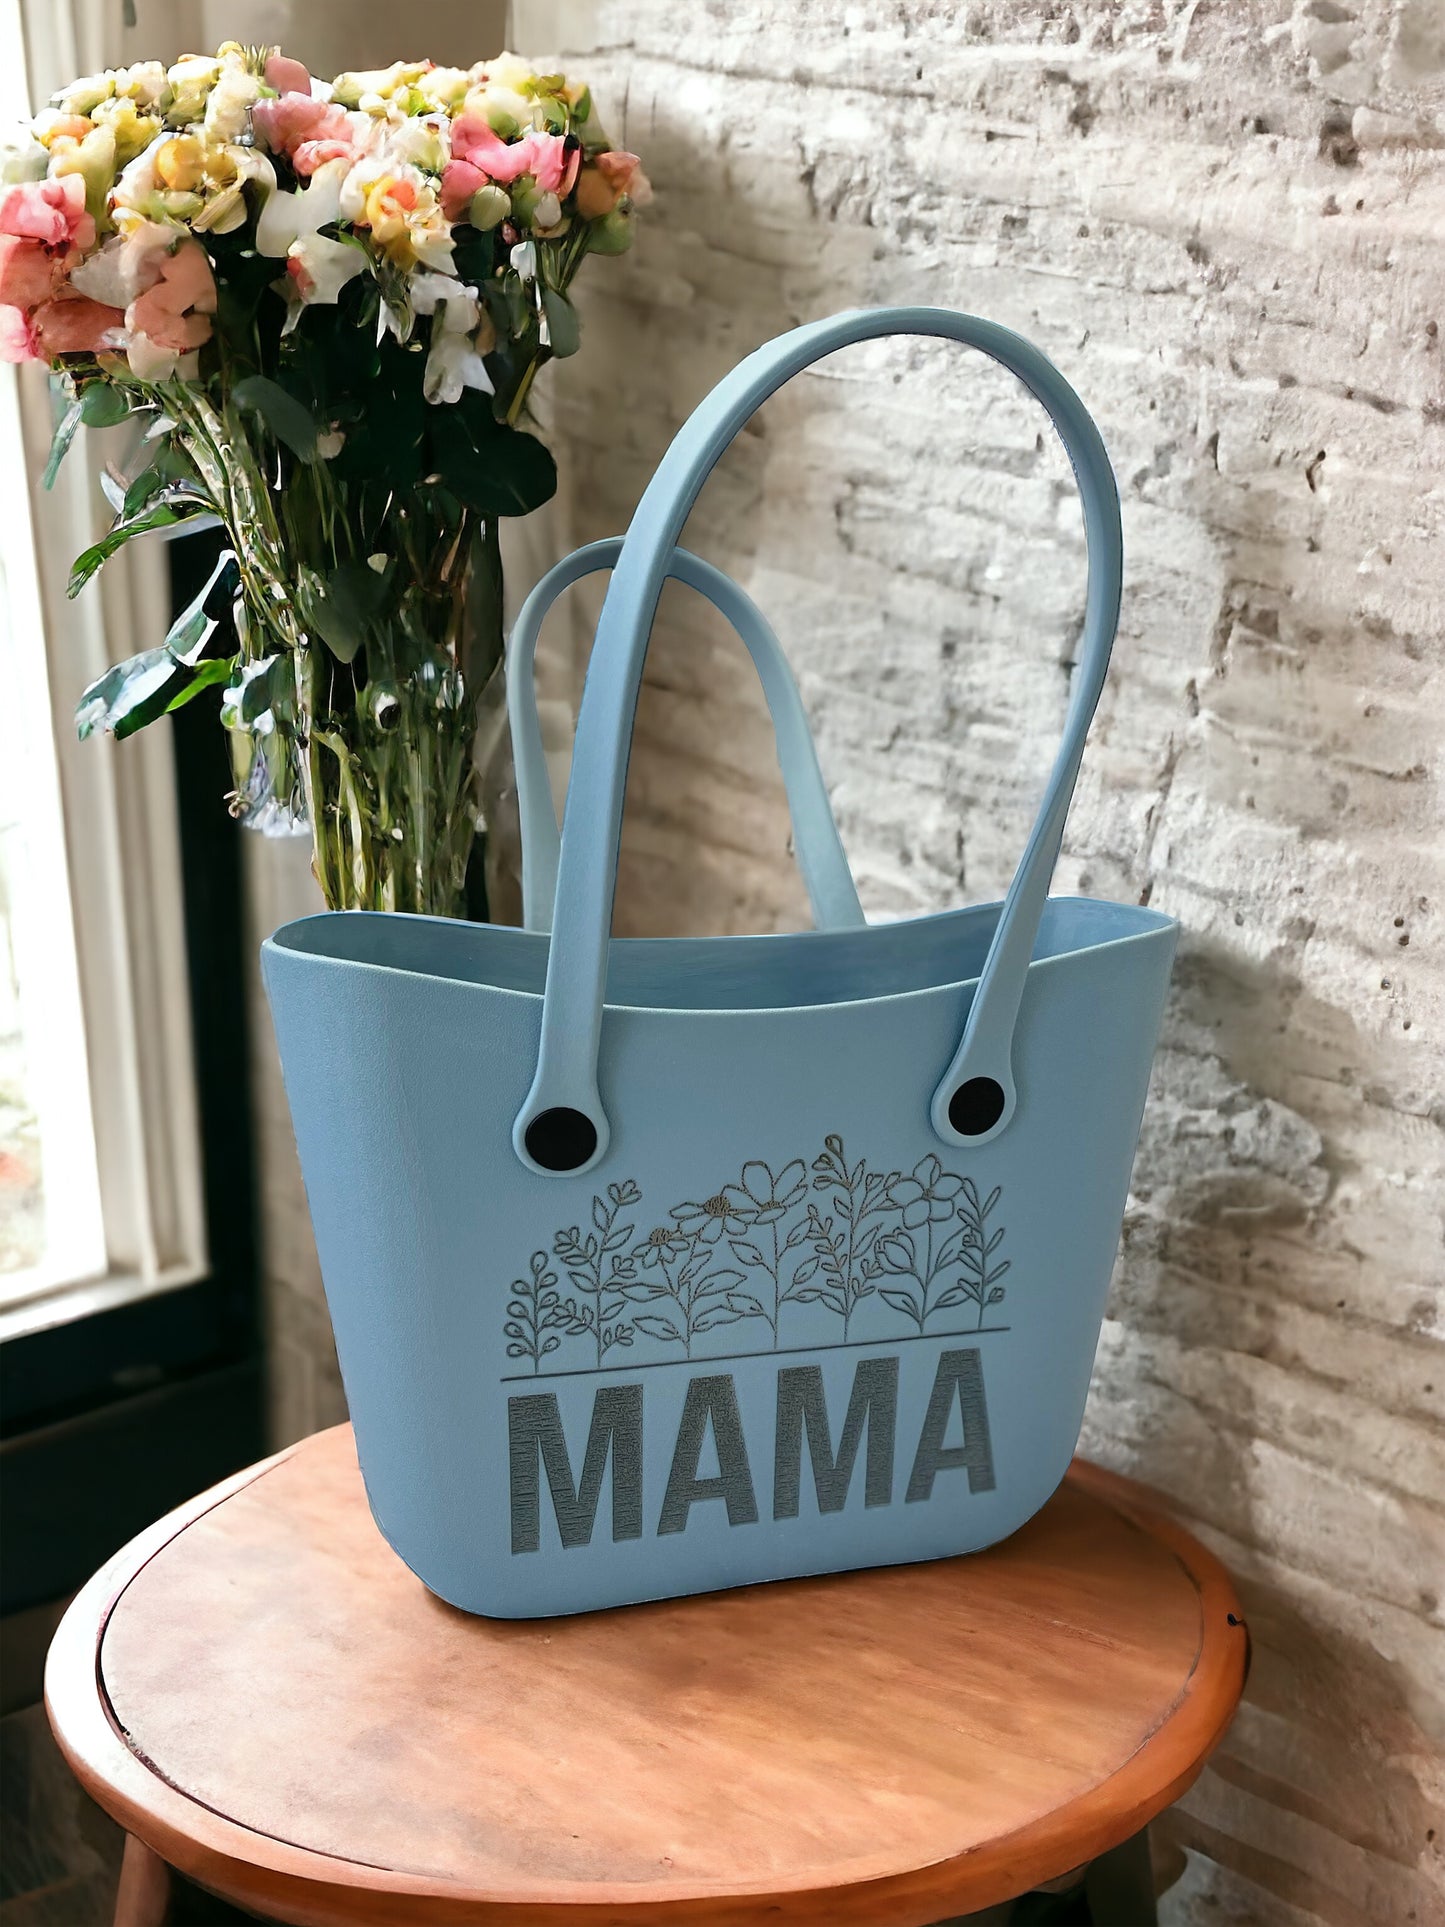 Mama Tote Bag | Personalized Grandparent Gift | Personalized Mothers Day Gift | Personalized Tote Bag | Personalized Beach Bag